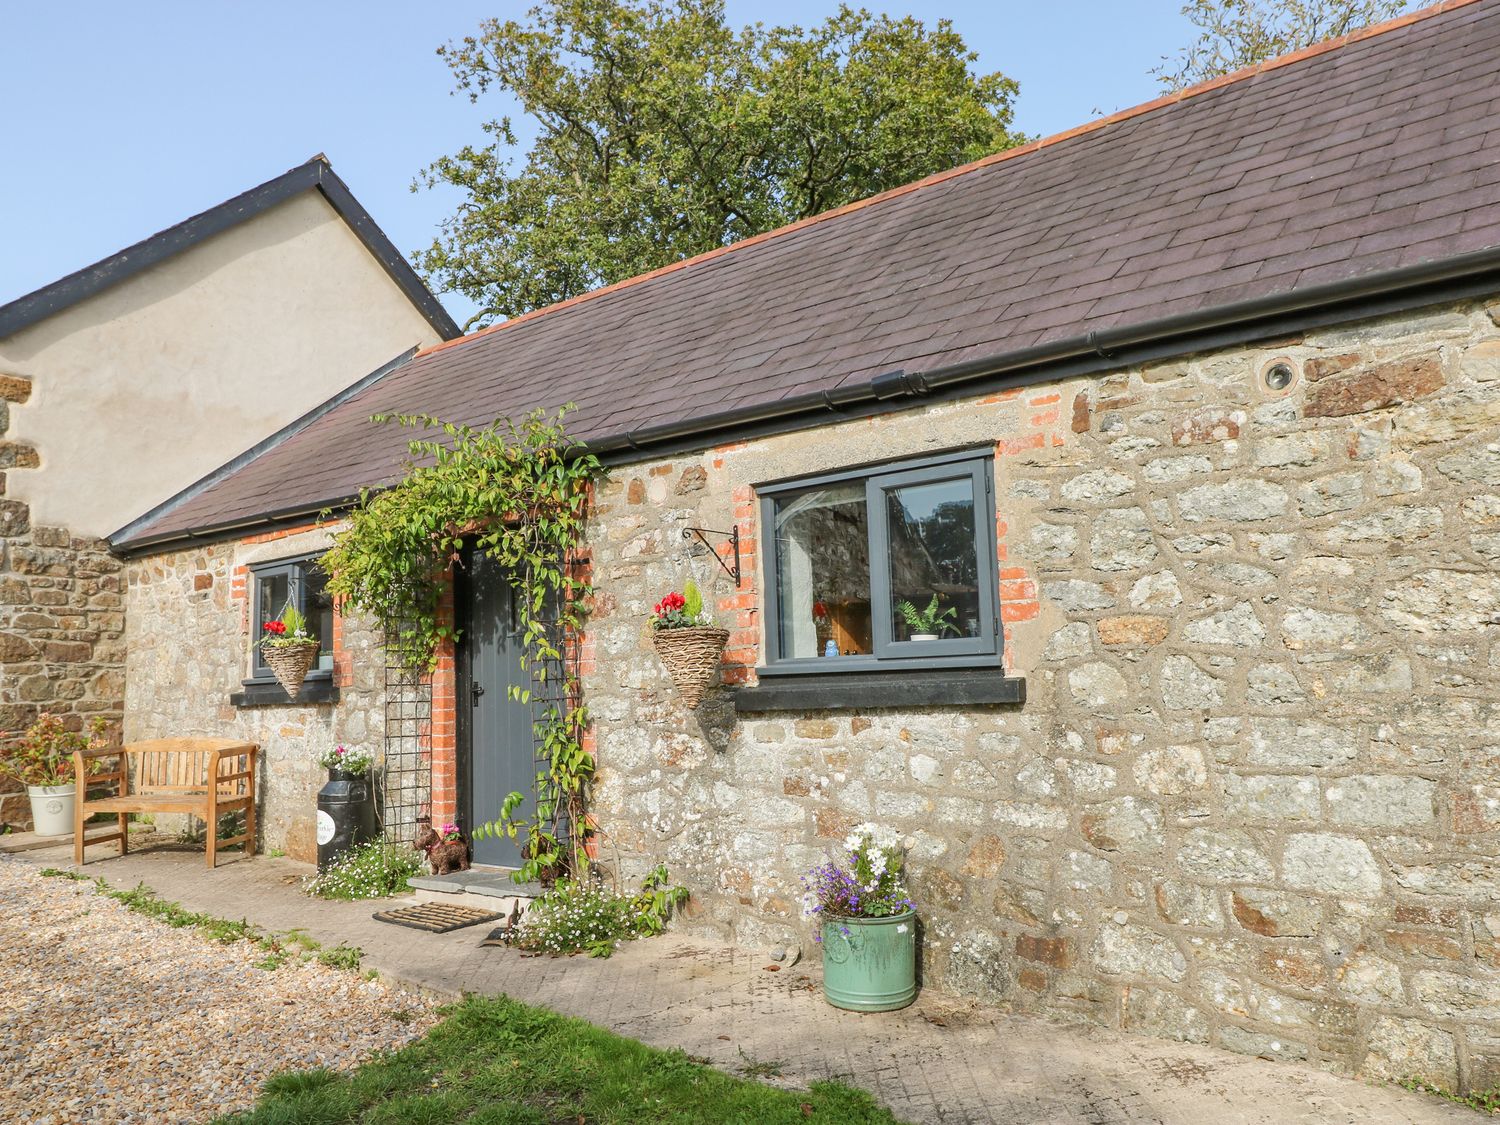 Honeysuckle Cottage - South Wales - 1138388 - photo 1